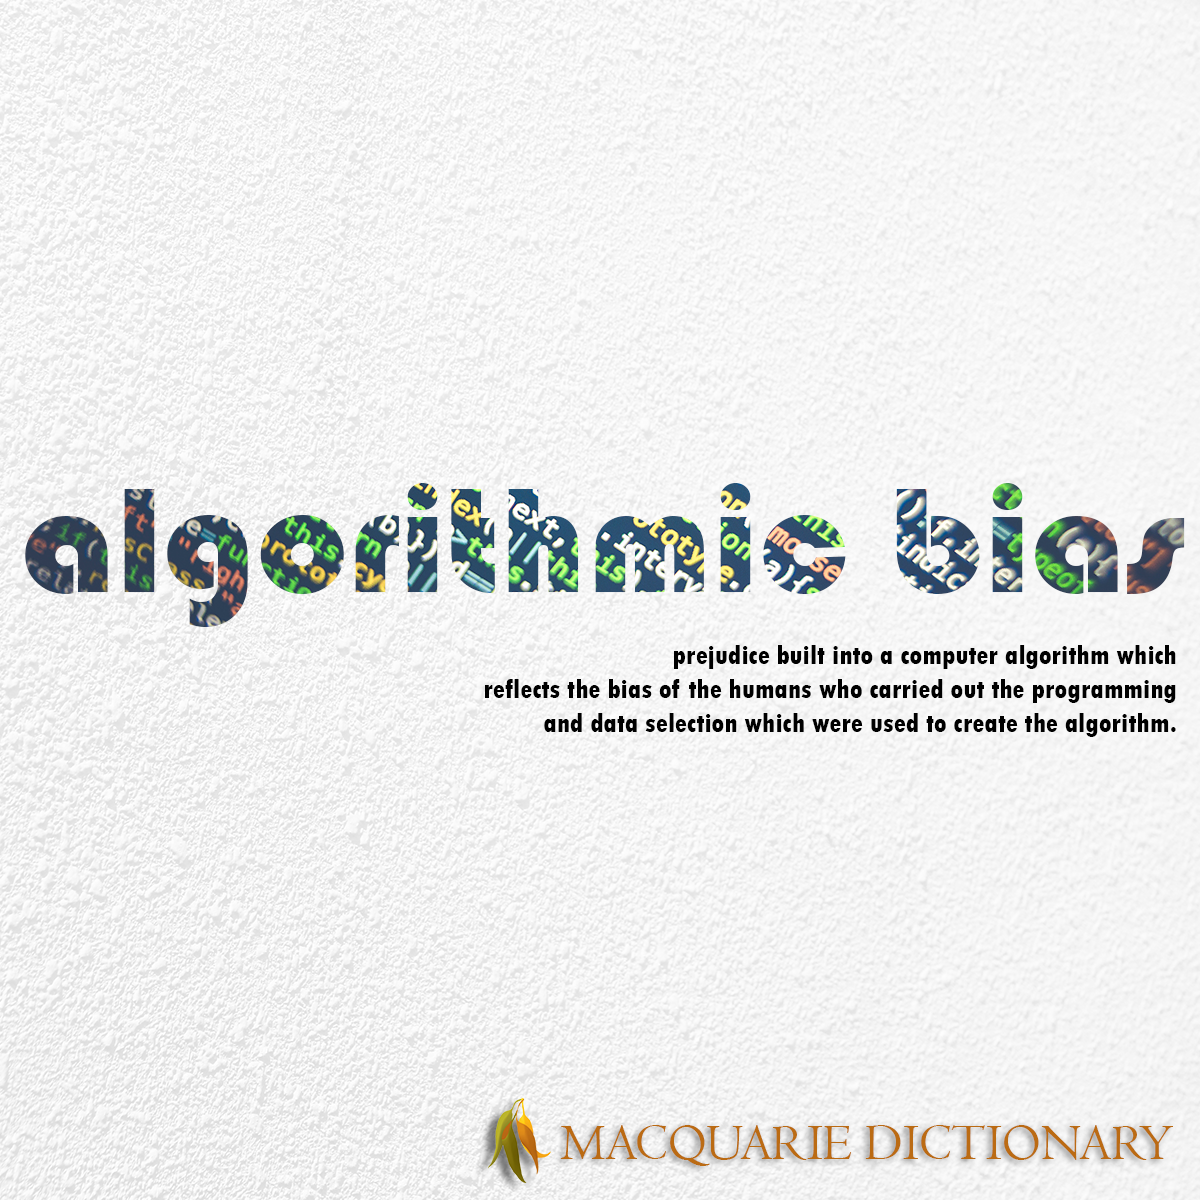 Image of Macquarie Dictionary Word of the Year - algorithmic bias - prejudice built into a computer algorithm which reflects the bias of the humans who carried out the programming and data selection which were used to create the algorithm.